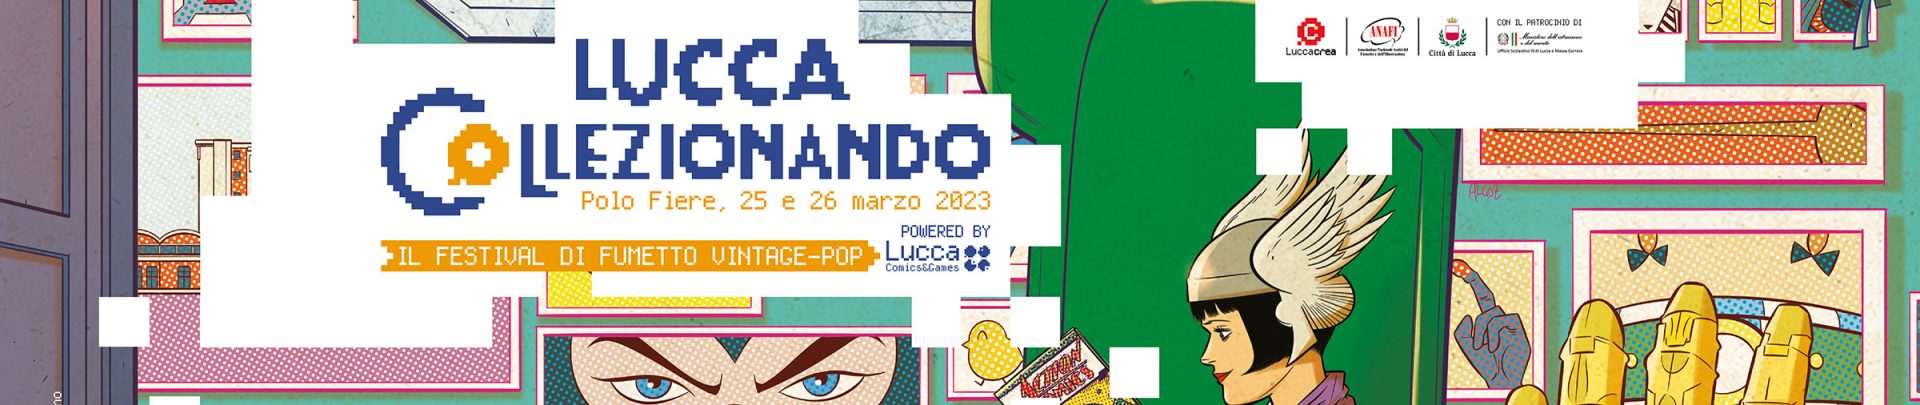 Max Bunker arriva a Lucca